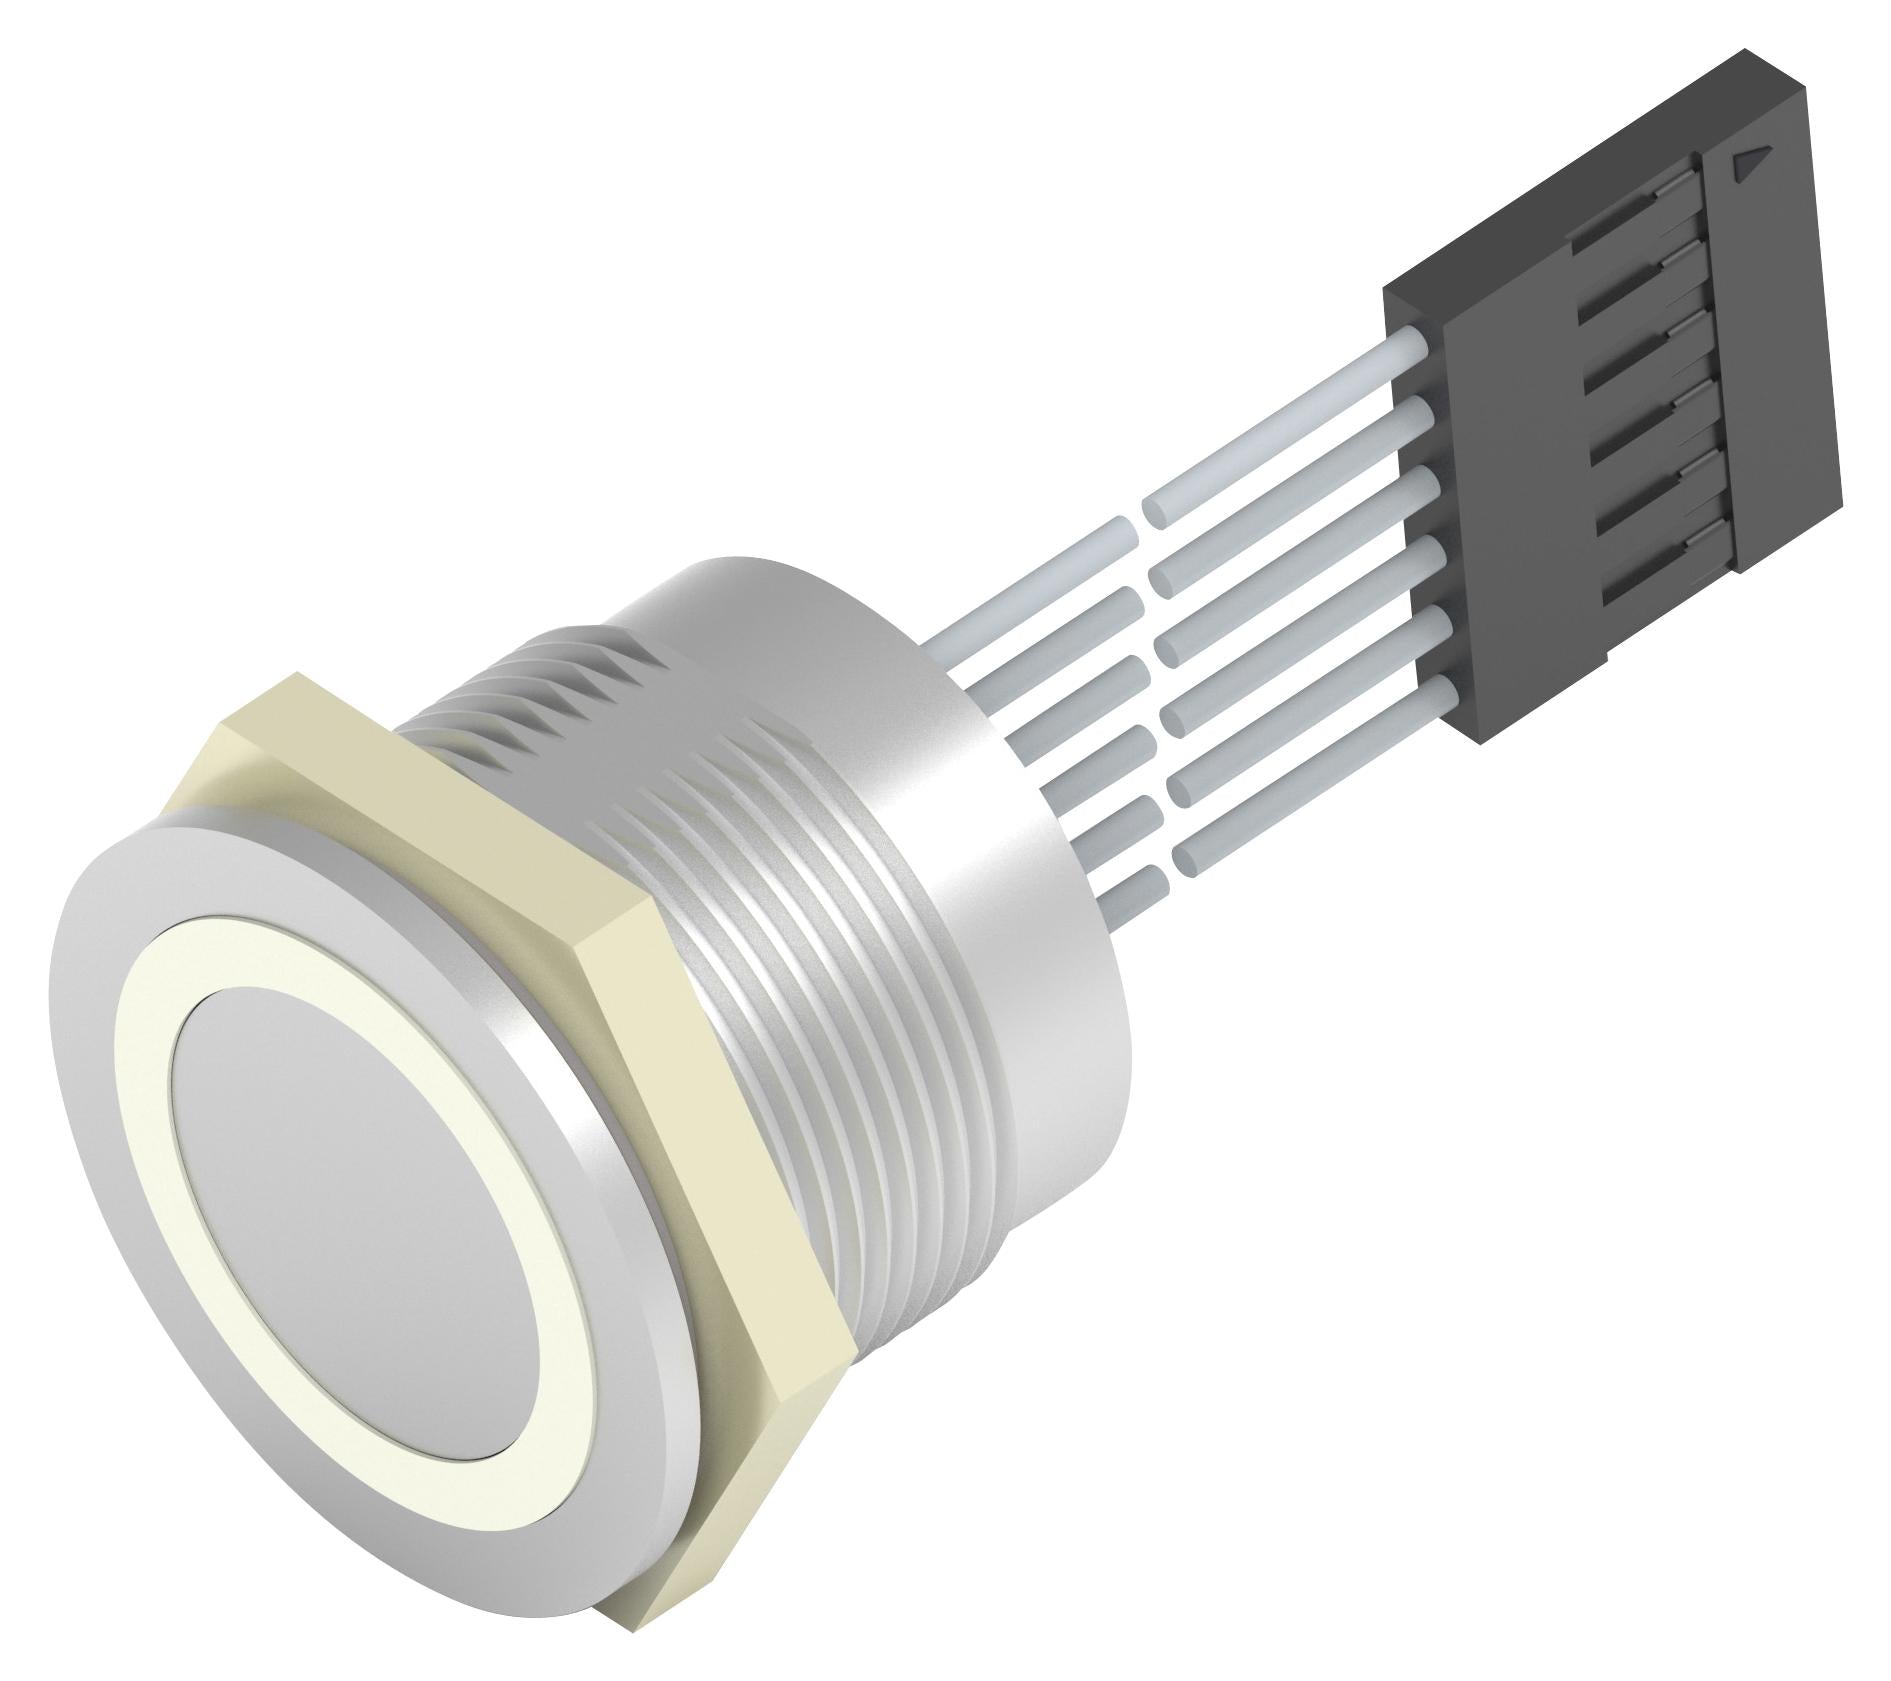 AVP22MAIOFE0DT5A04 VANDAL RESISTANT SW, SPST, 1A, 24V, PANL ALCOSWITCH - TE CONNECTIVITY